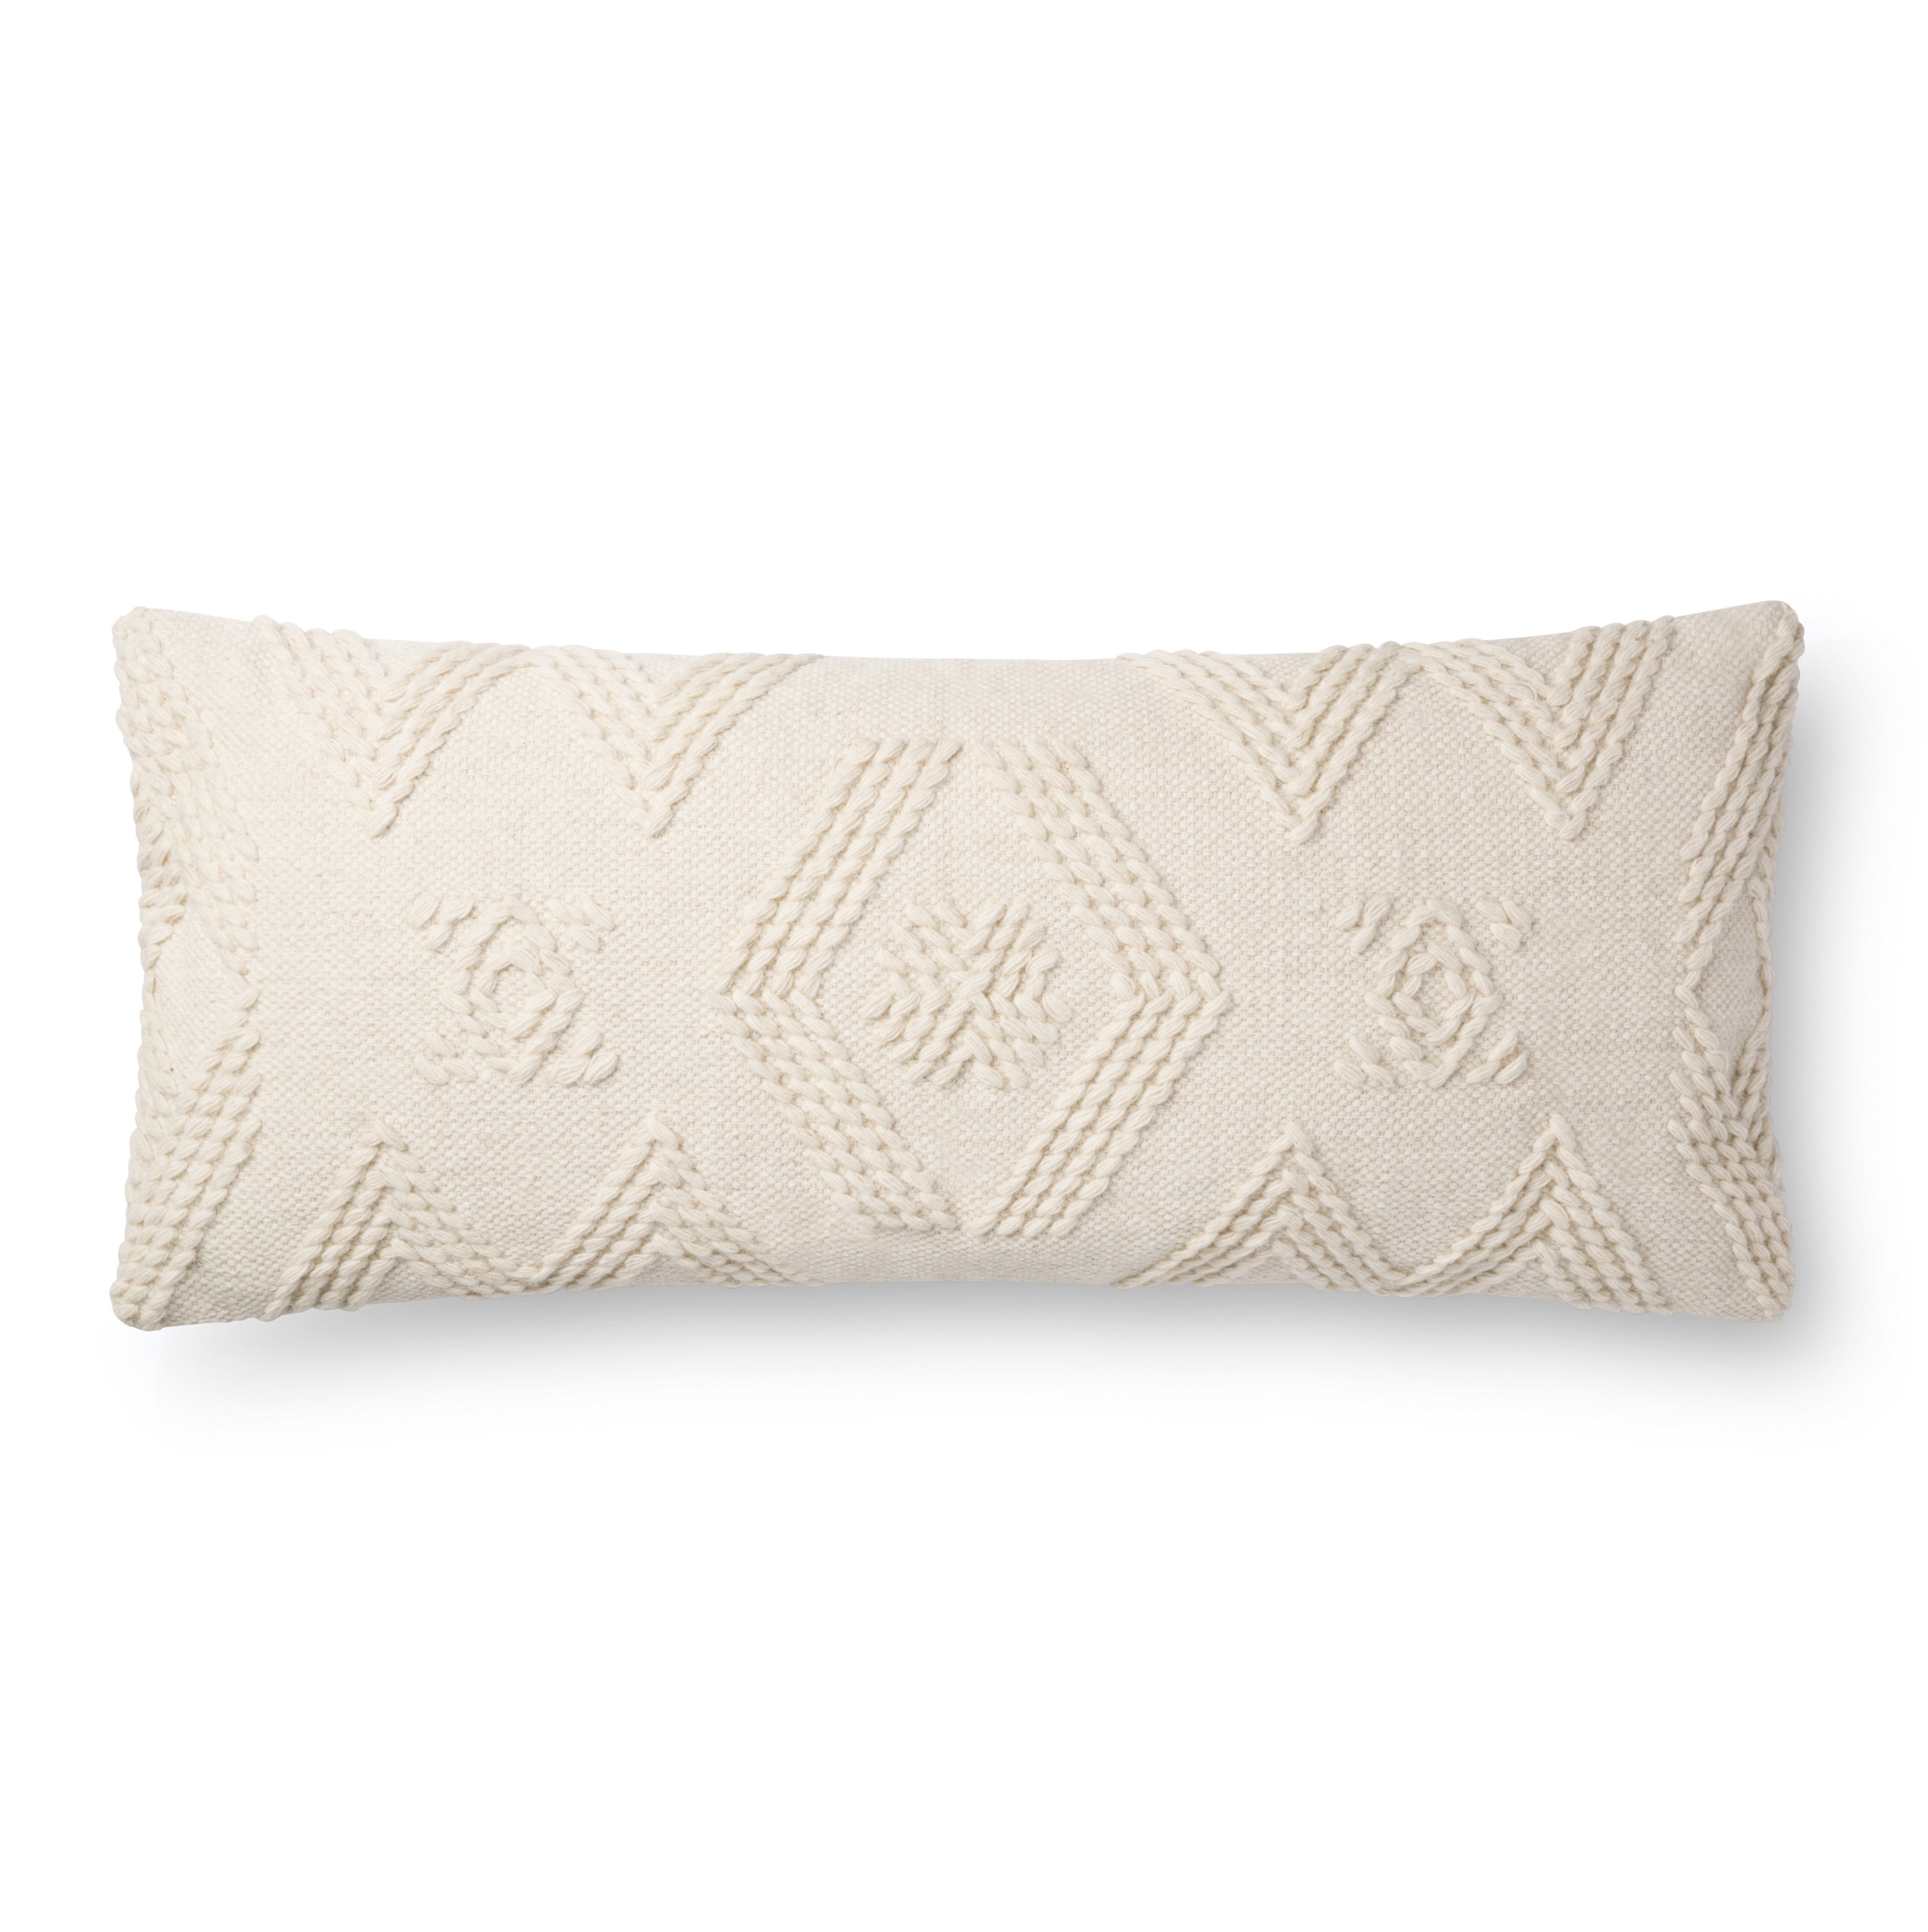 Magnolia Home by Joanna Gaines PILLOWS P1105 IVORY / IVORY 13" x 35" Cover Only - Image 1